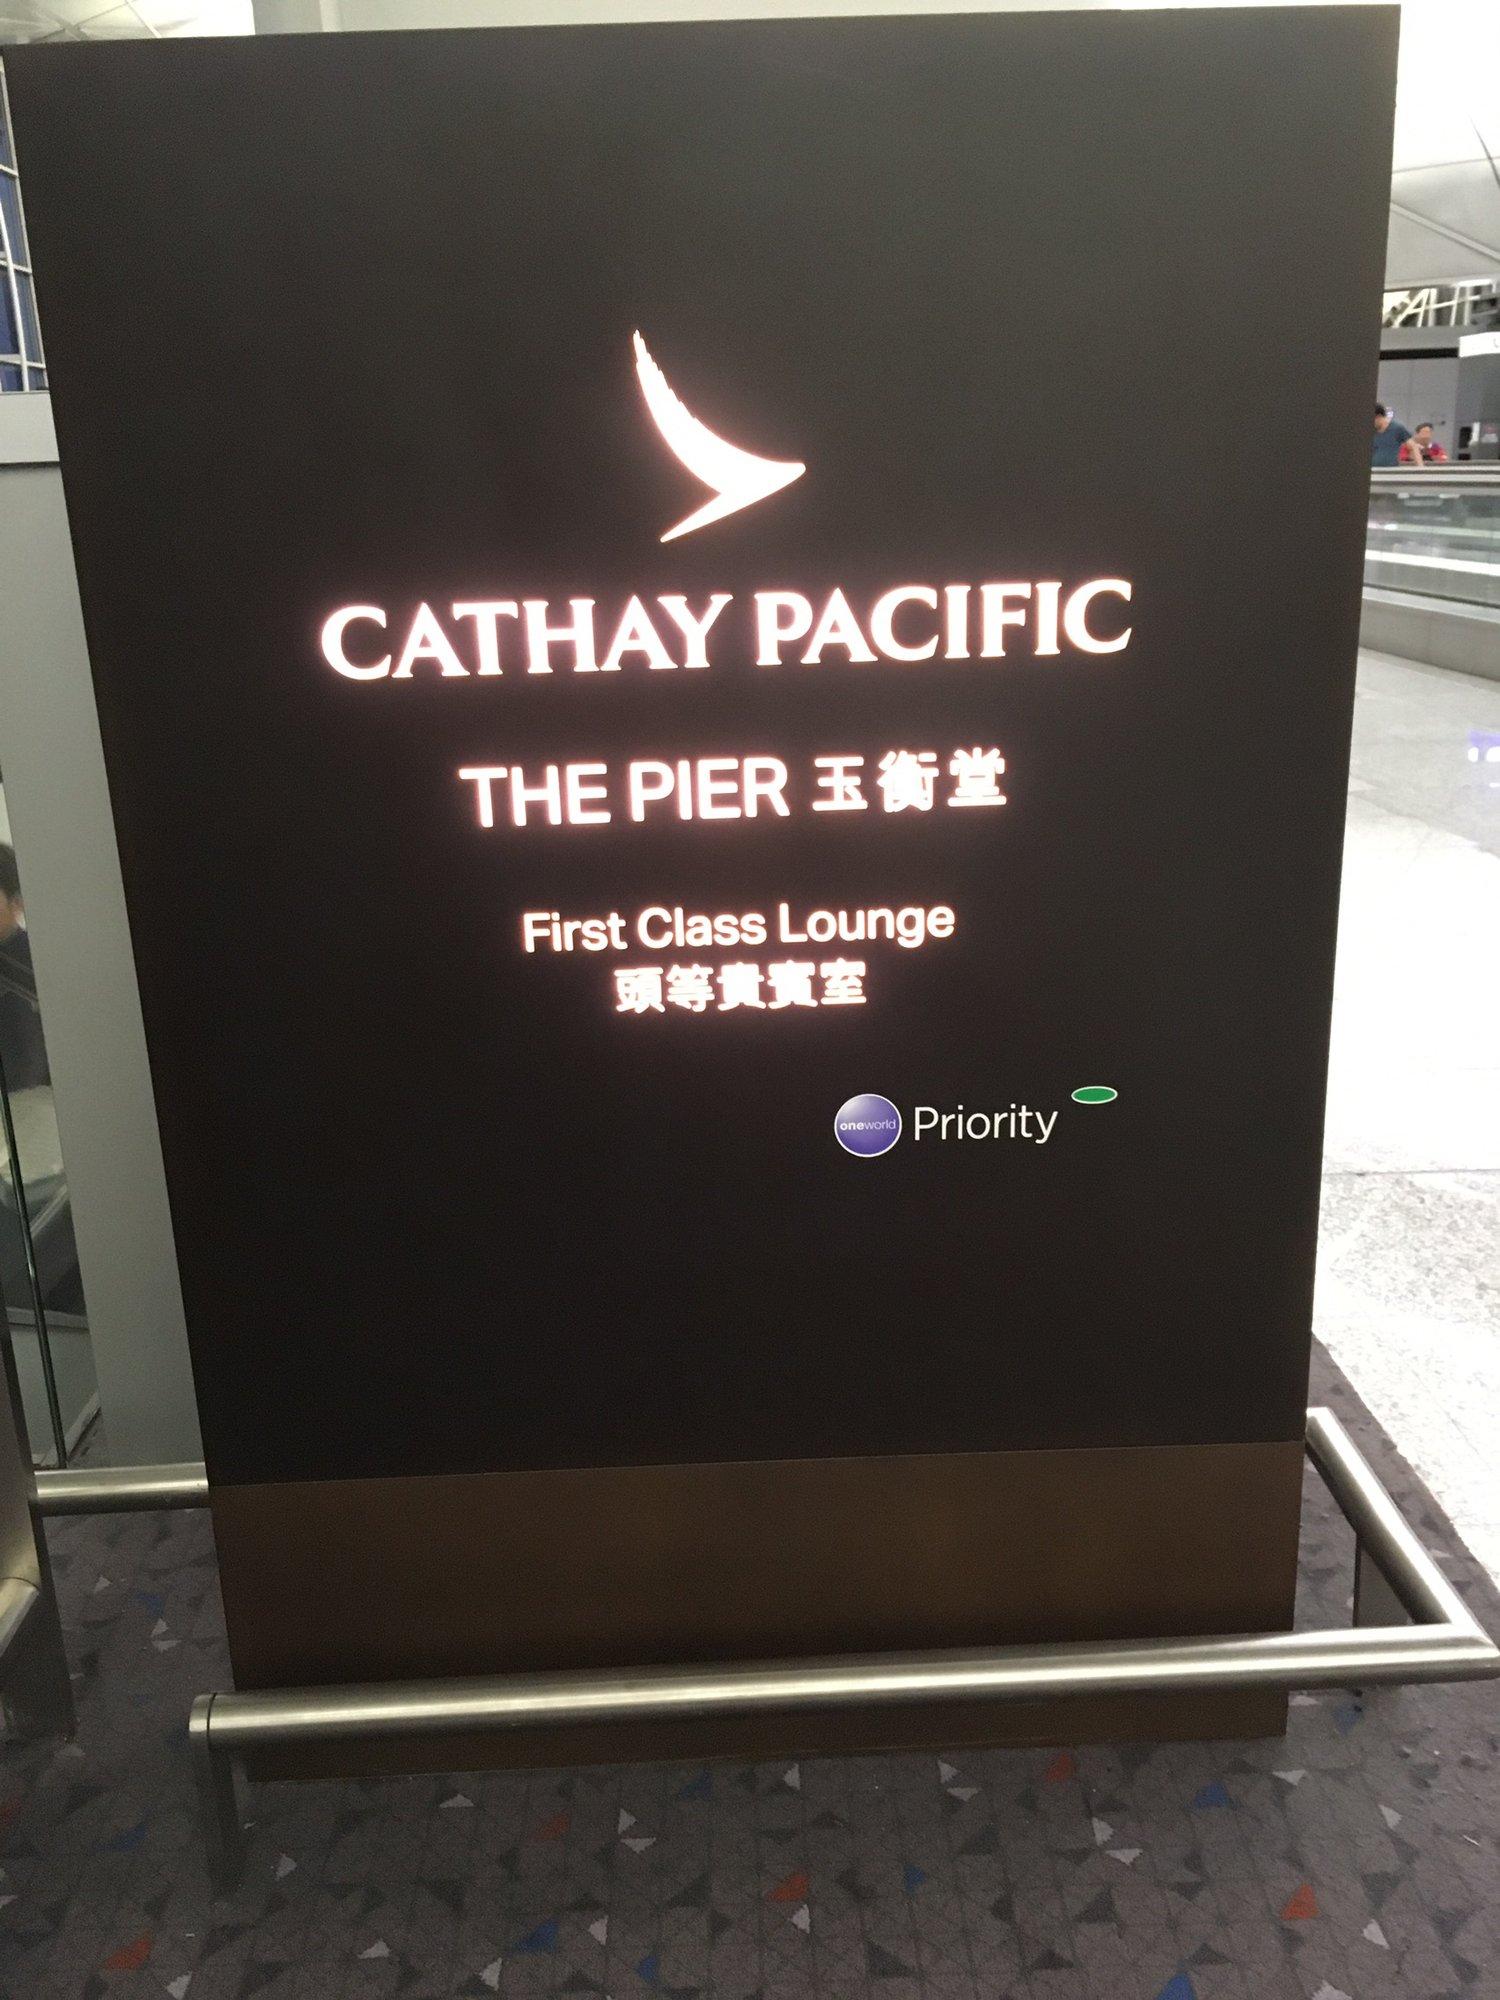 Cathay Pacific The Pier First Class Lounge image 75 of 100